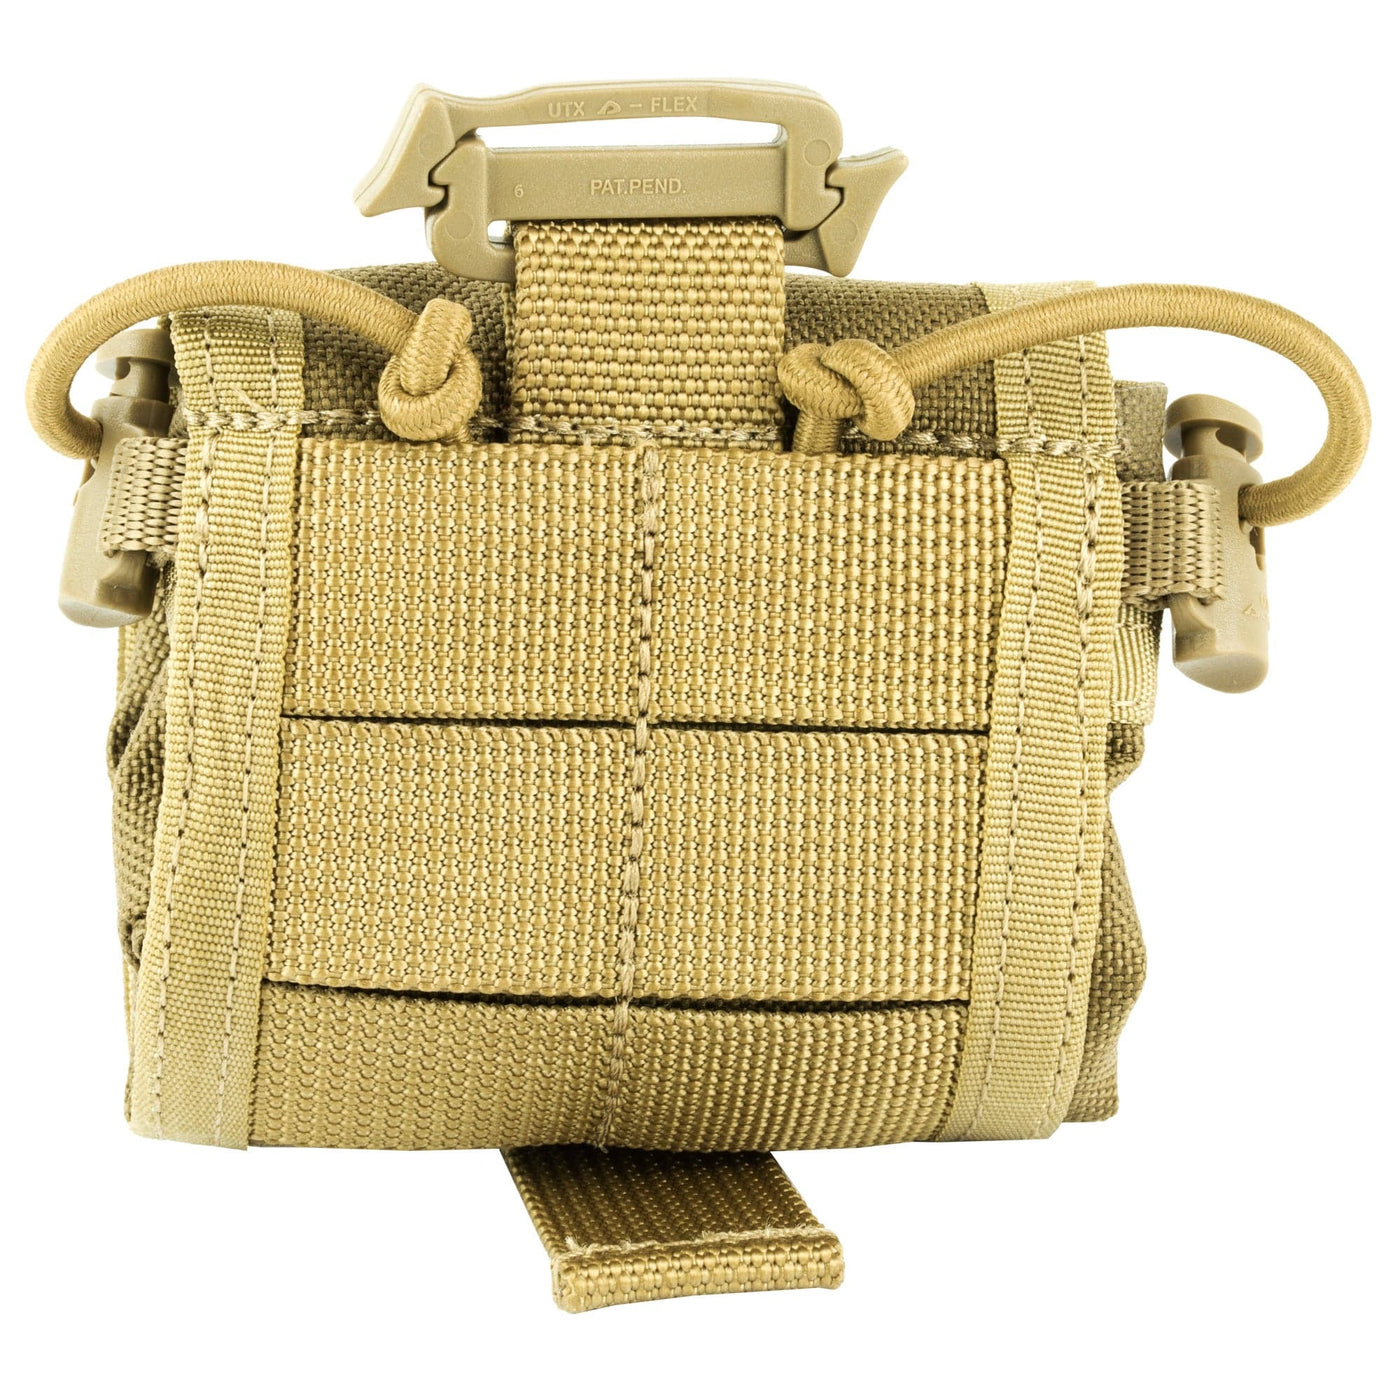 Maxpedition Maxpedition Rollypoly Dump Pch Khaki Holsters